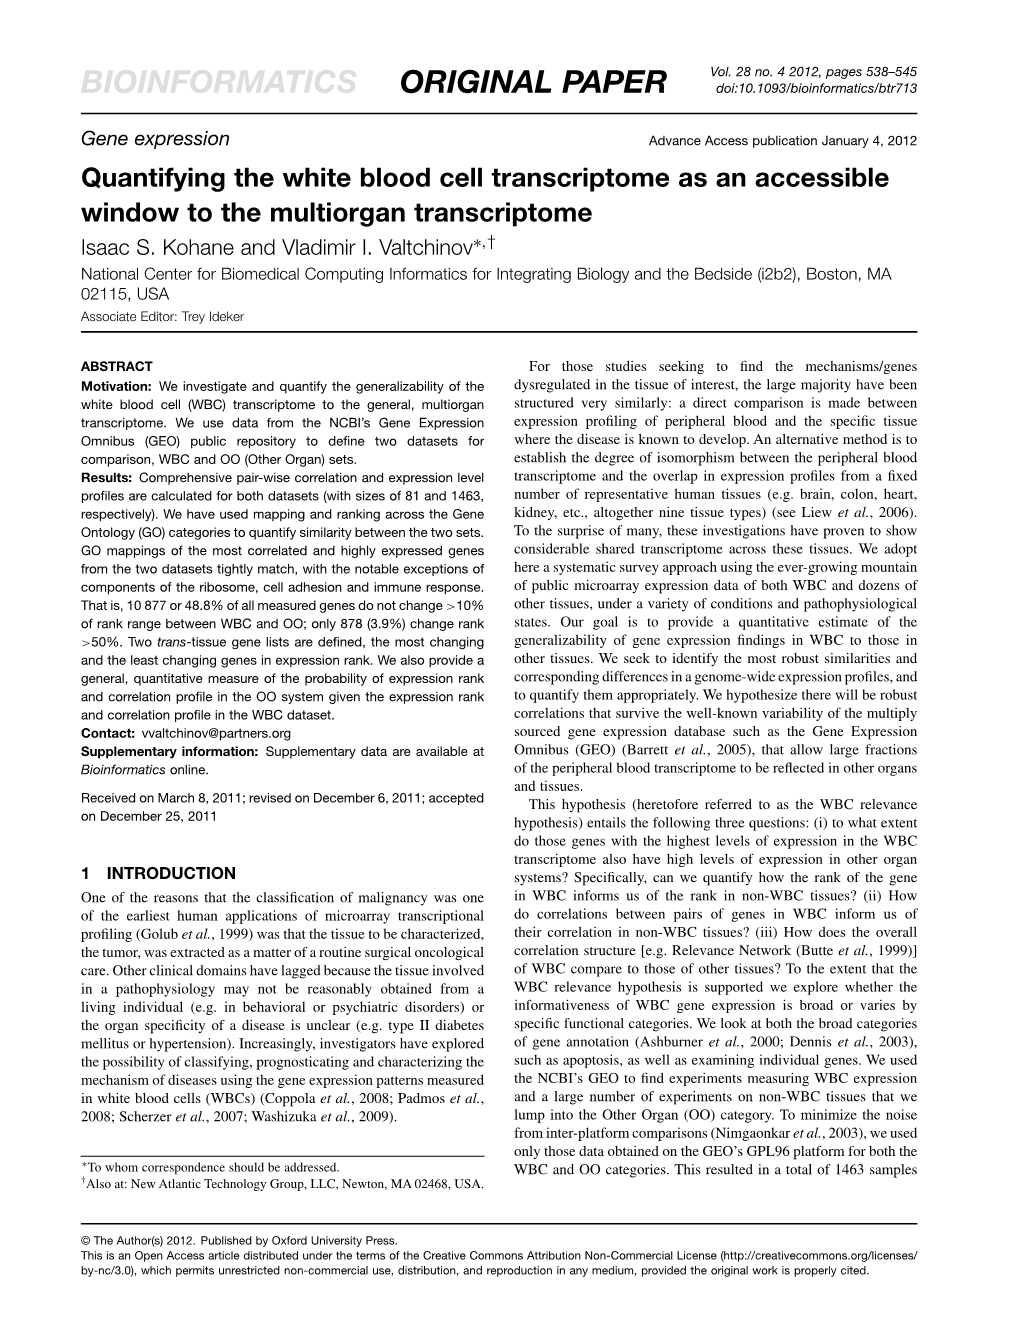 Quantifying the White Blood Cell Transcriptome As an Accessible Window to the Multiorgan Transcriptome Isaac S